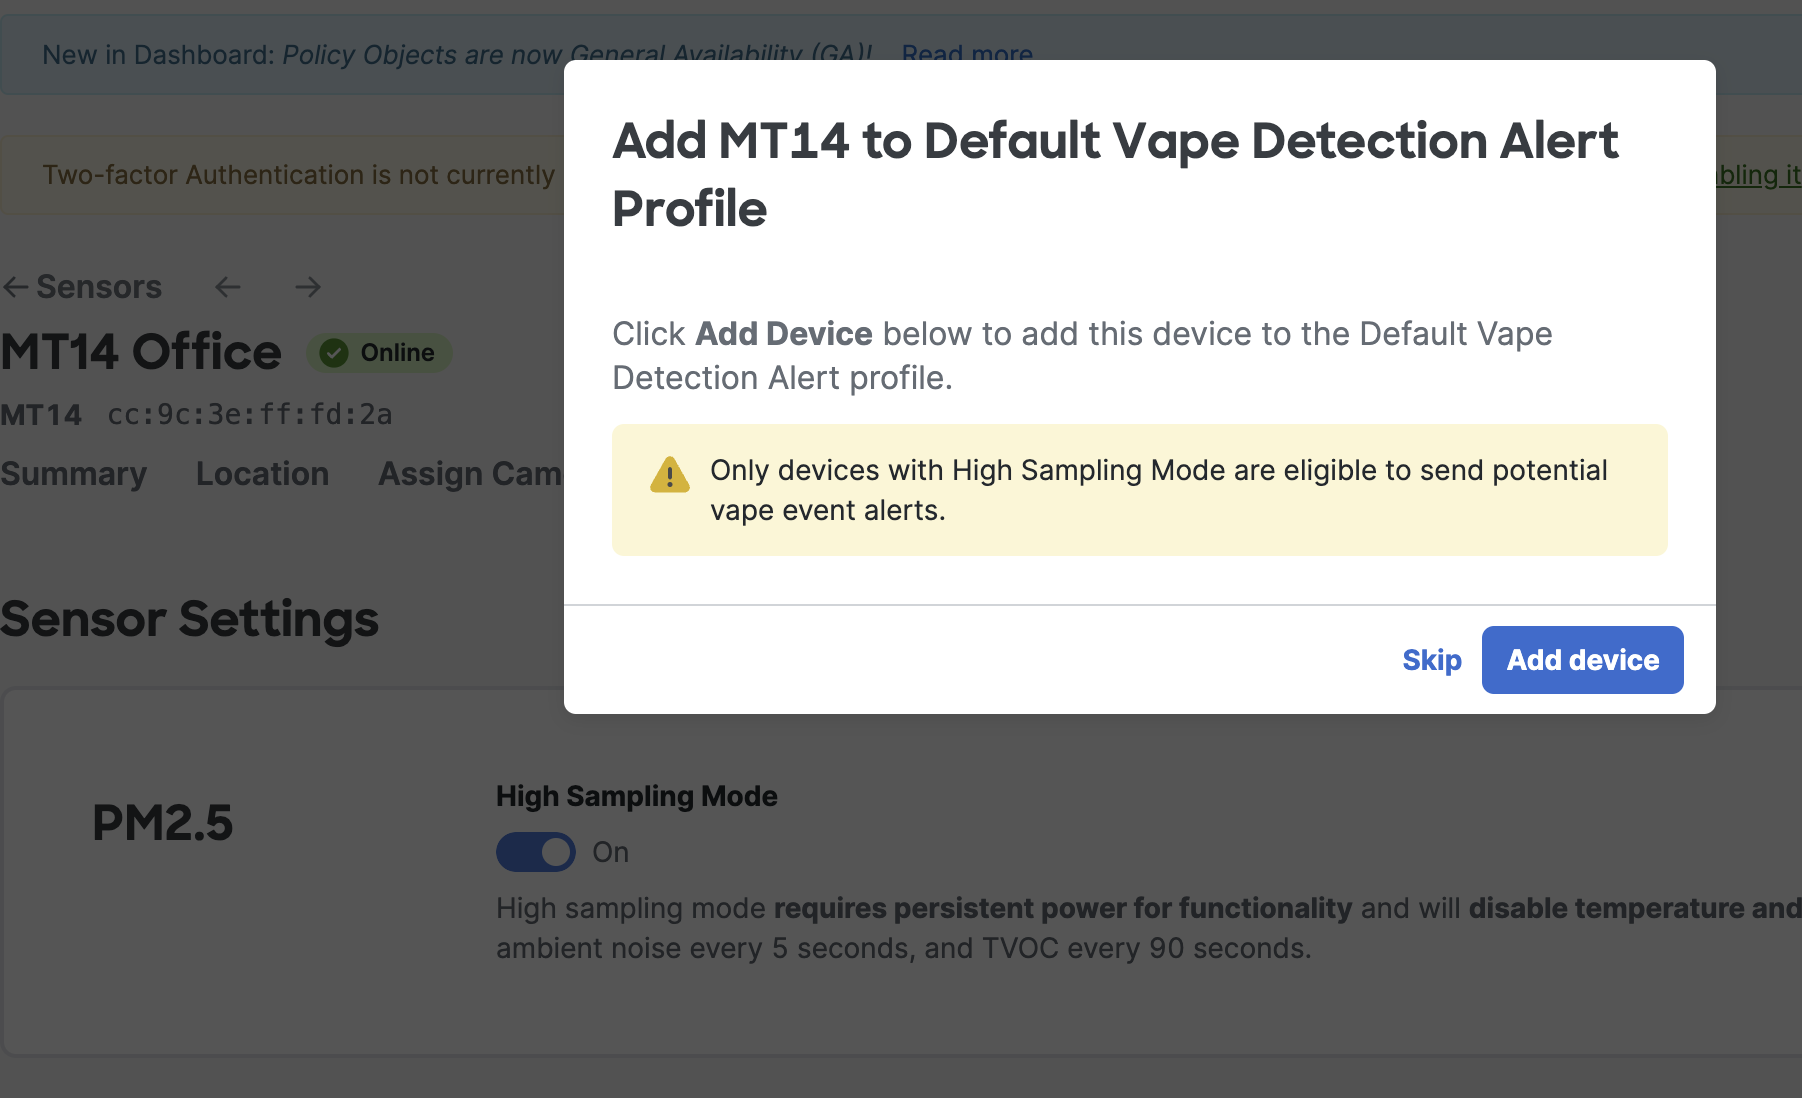 Dashboard UI prompt saying Add MT14 to Default Vape Detection Alert Profile Click Add Device below to add this device to the Default Vape Detection Alert profile. ! Only devices with High Sampling Mode are eligible to send potential vape event alerts. Options are Skip and Add Device